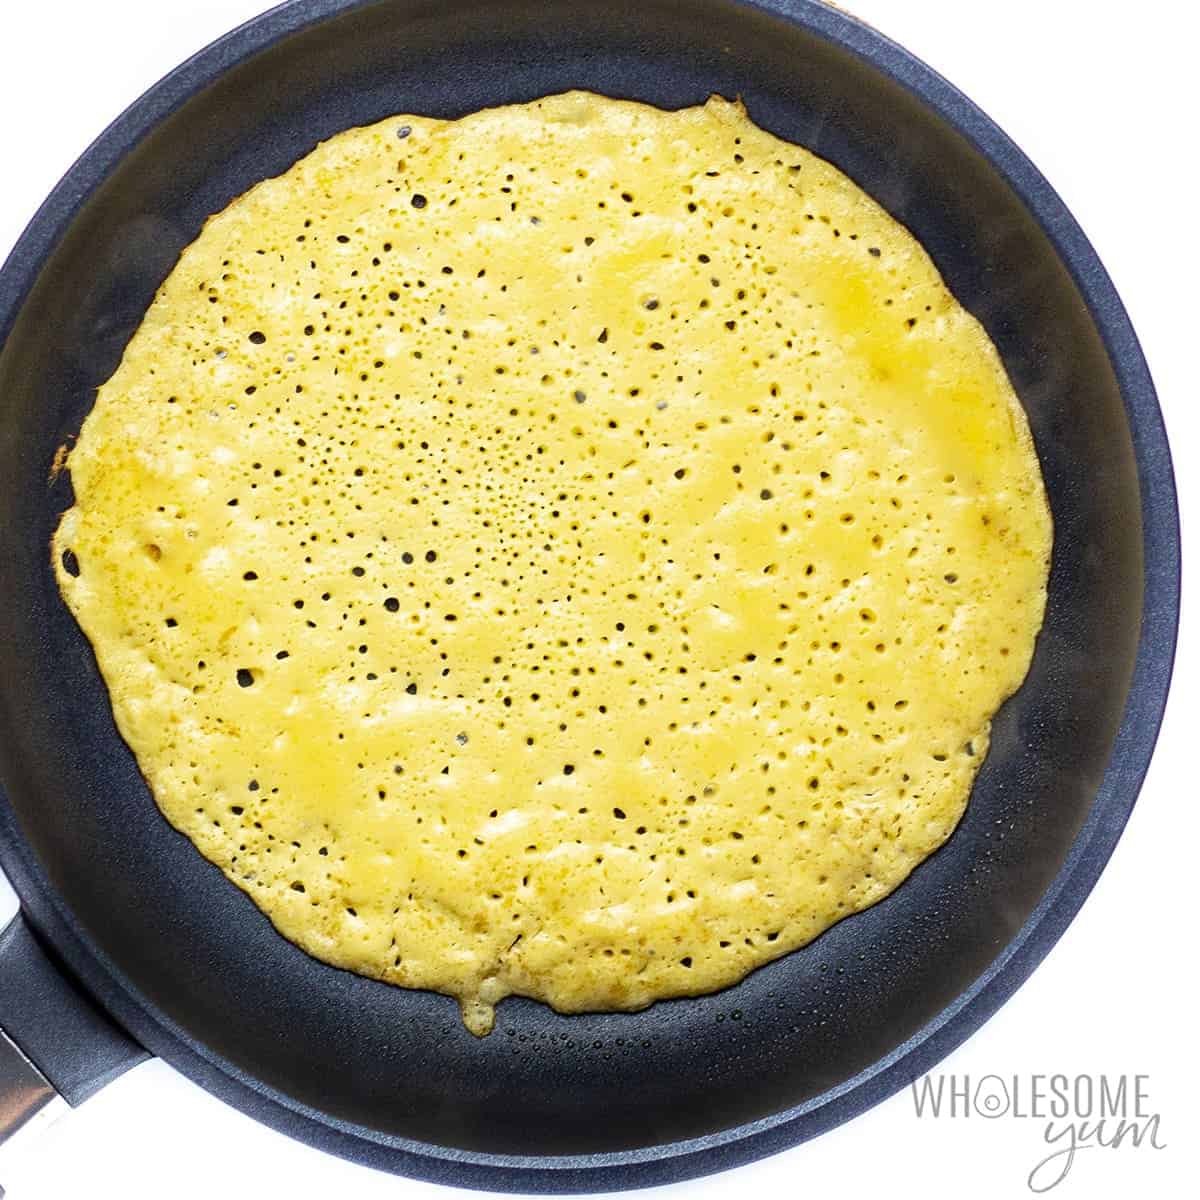 Cooking paleo tortillas in a nonstick skillet.